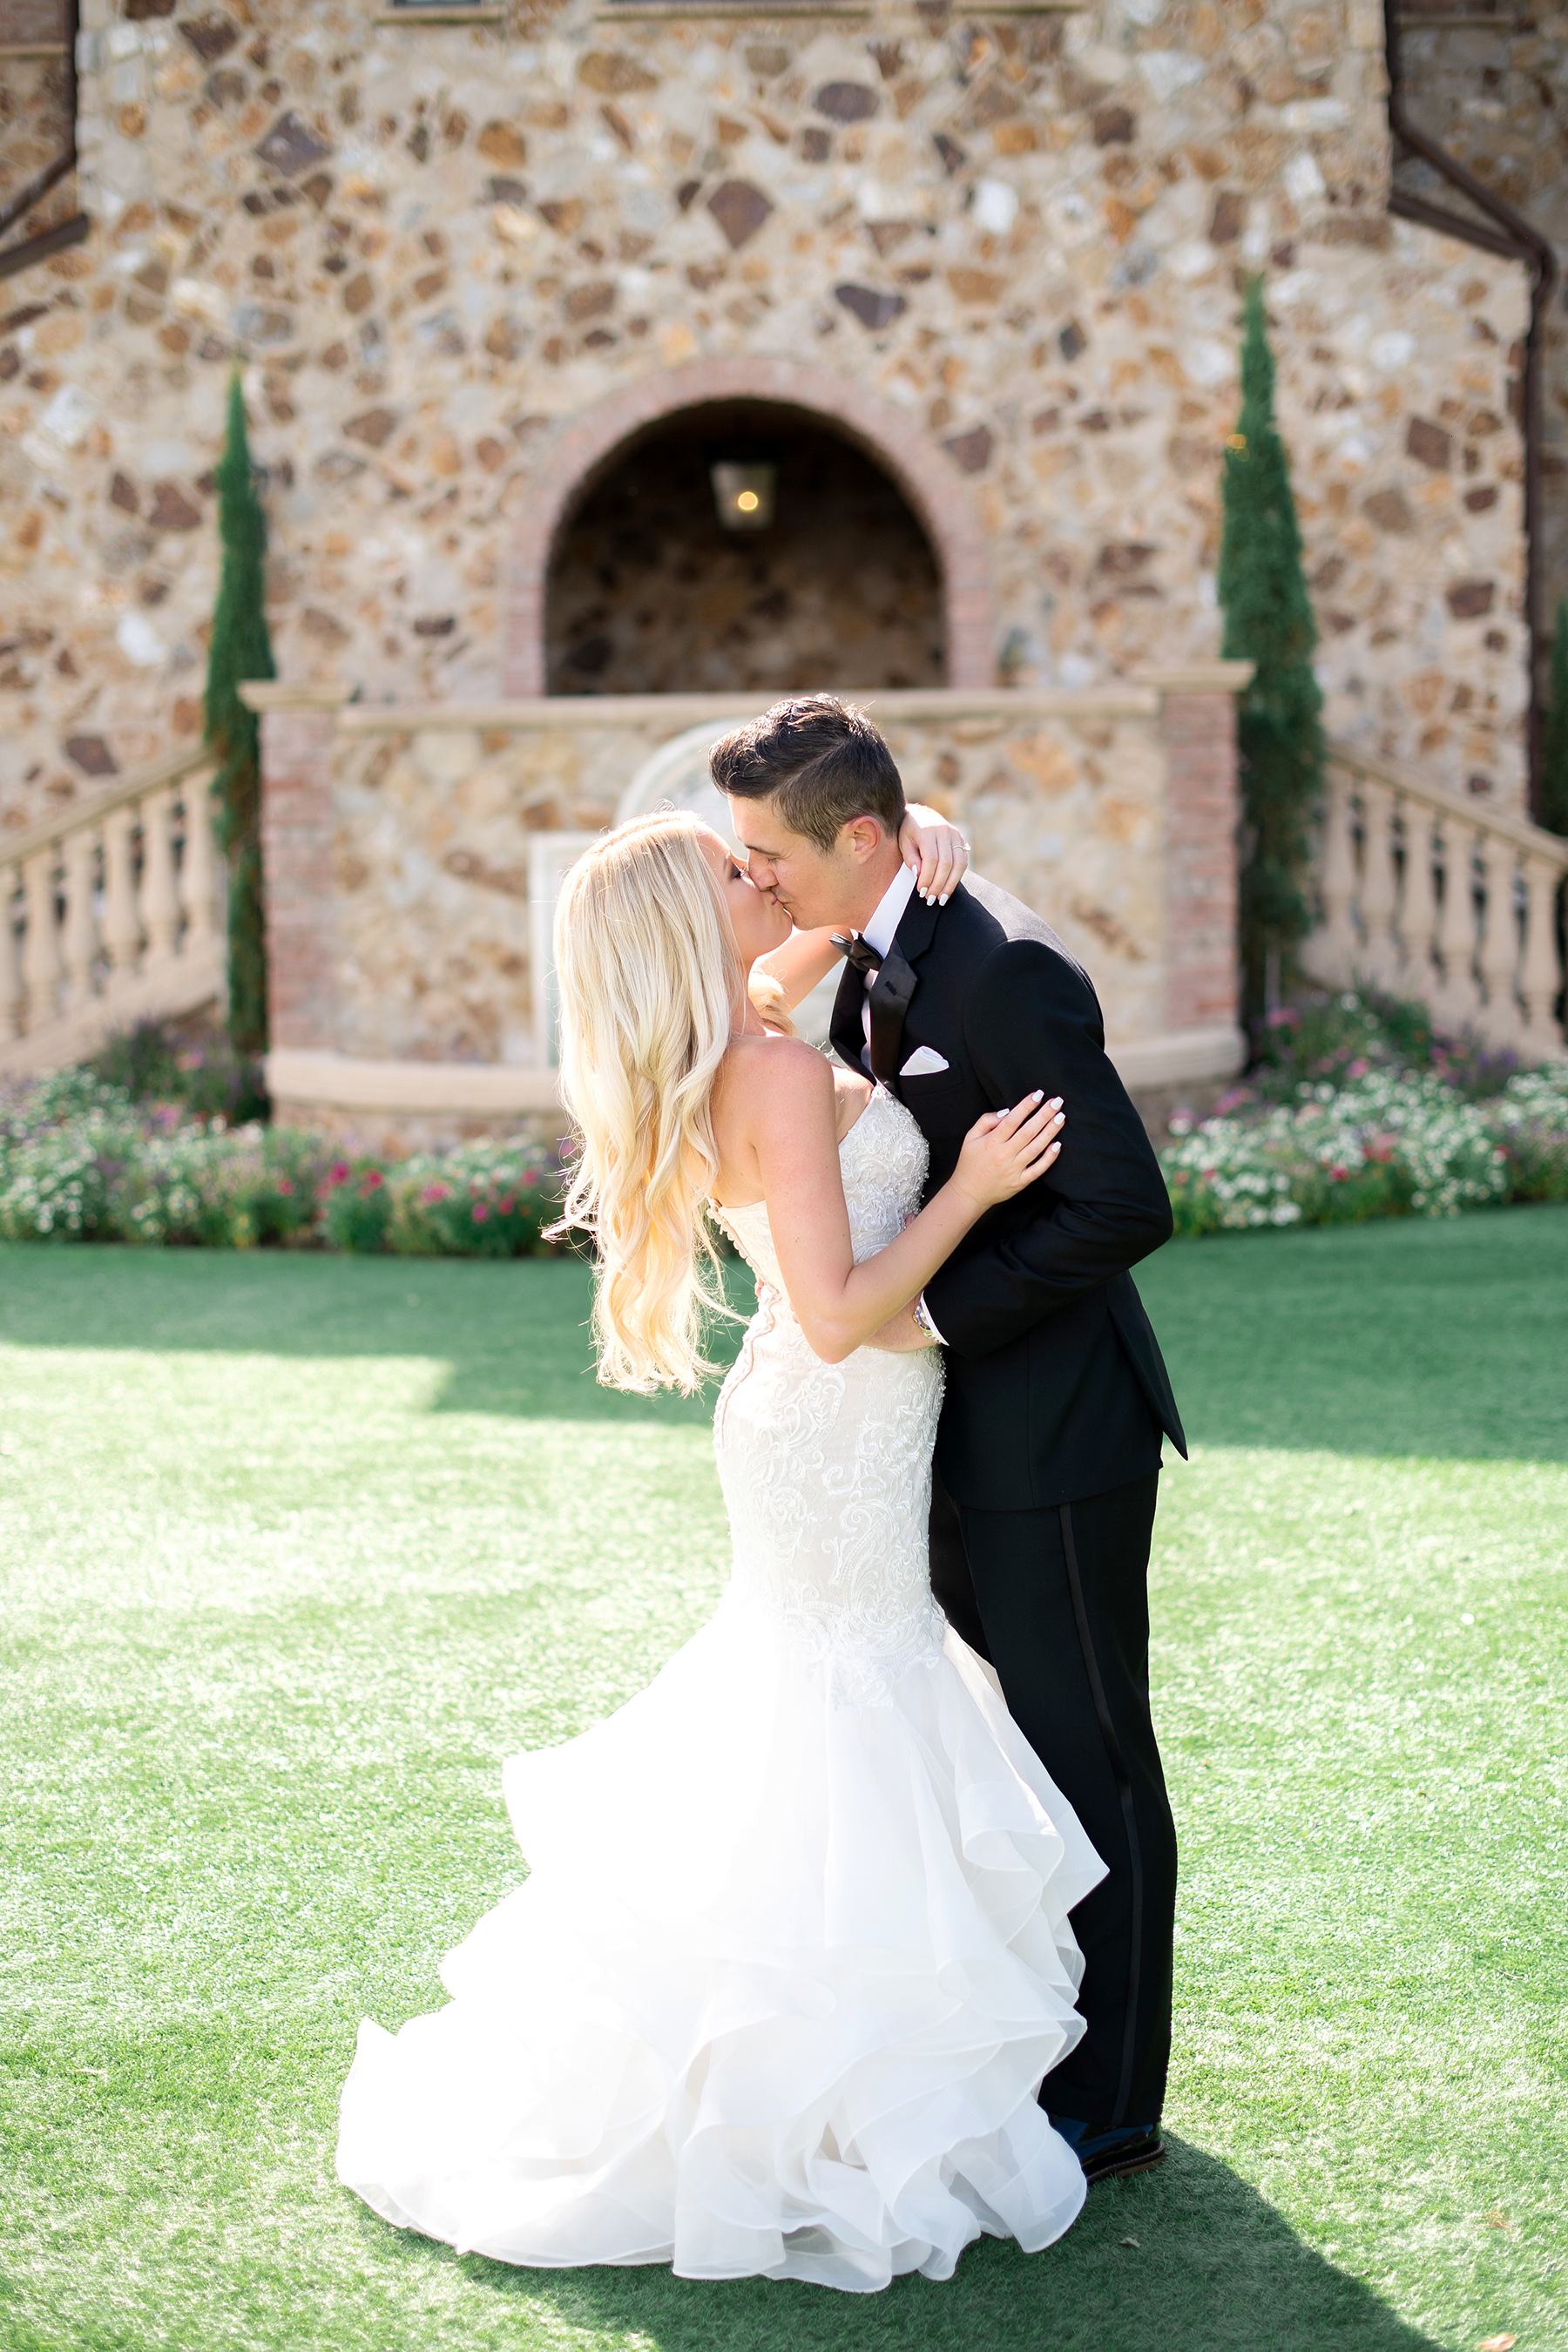 Classic White and Green Destination Wedding for Denver Couple